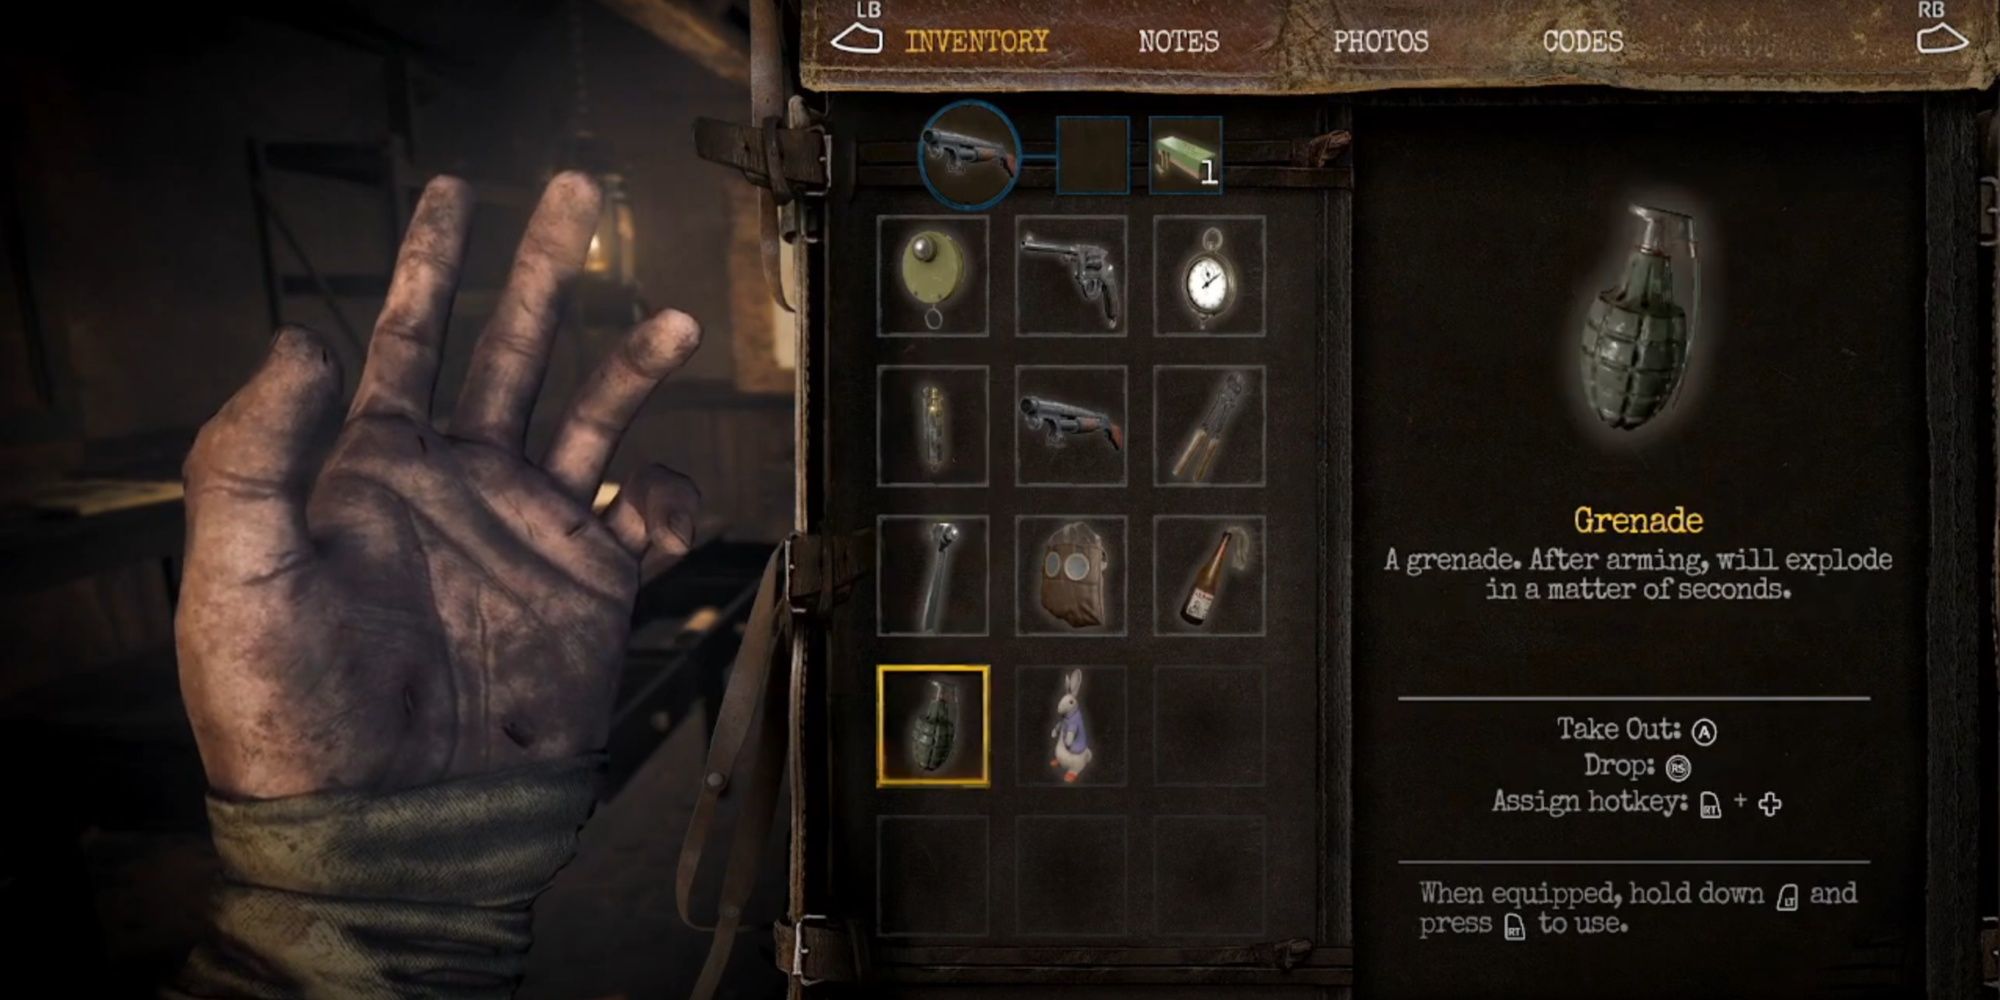 Grenade Inventory View in Amnesia: The Bunker